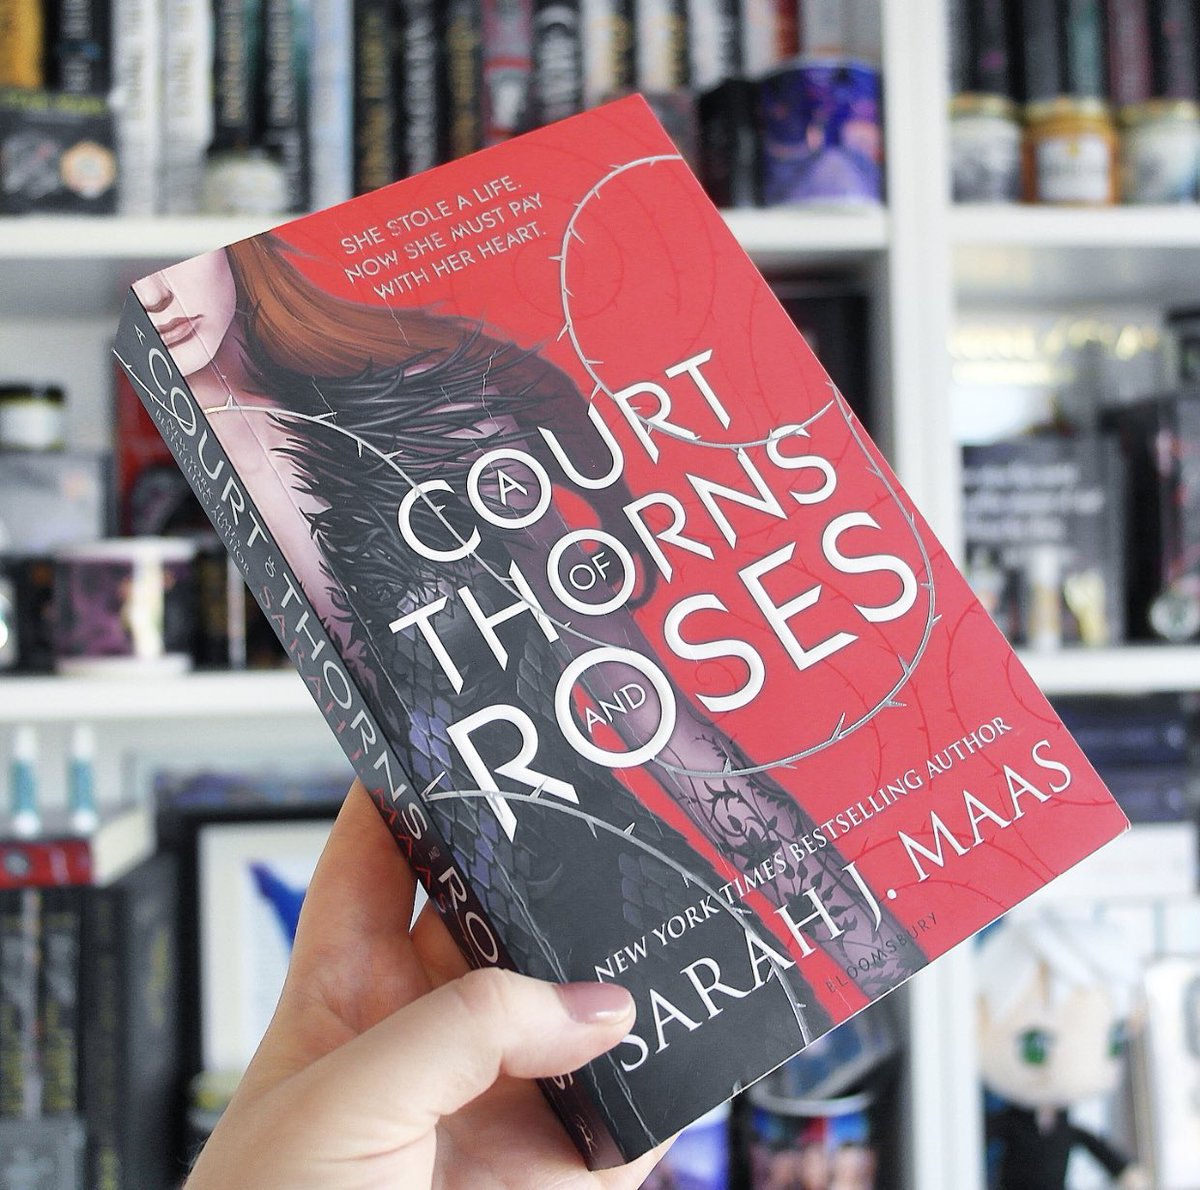 28. A Court of Thorns and Roses by Sarah J. Maas (sixth read )• You know I love this book• Tabbed and annotated for the first time - so much fun!• I learn something new every time• I agree that there is a lack of diversity/rep• This book changed my life • 5/5 stars